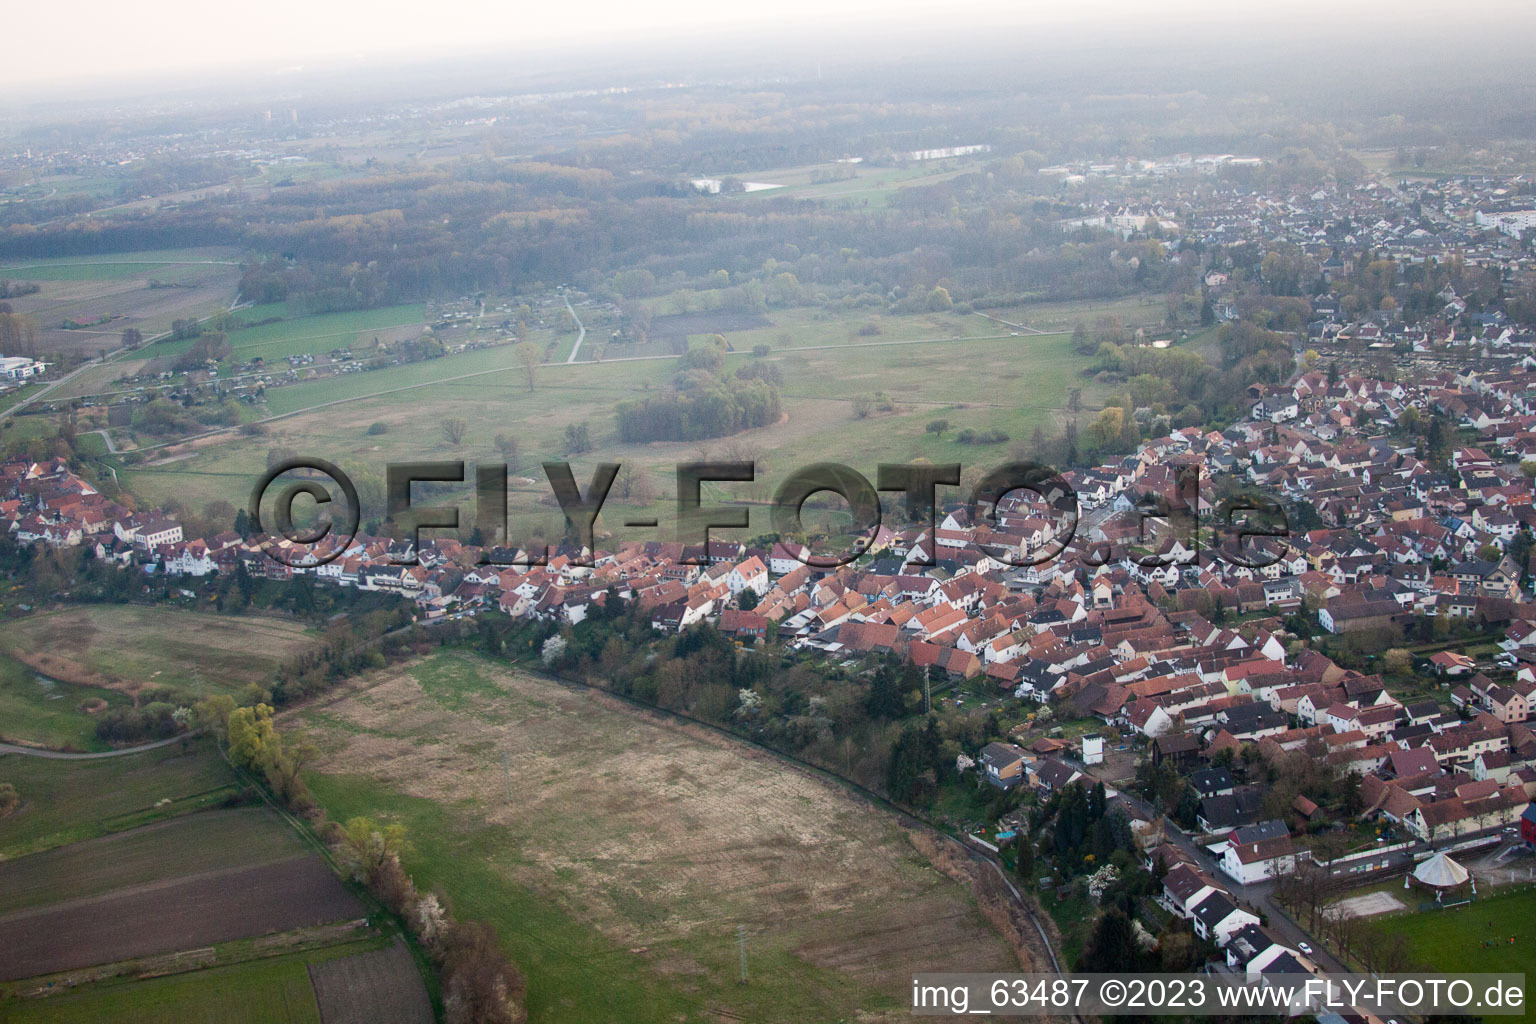 Aerial photograpy of Jockgrim in the state Rhineland-Palatinate, Germany